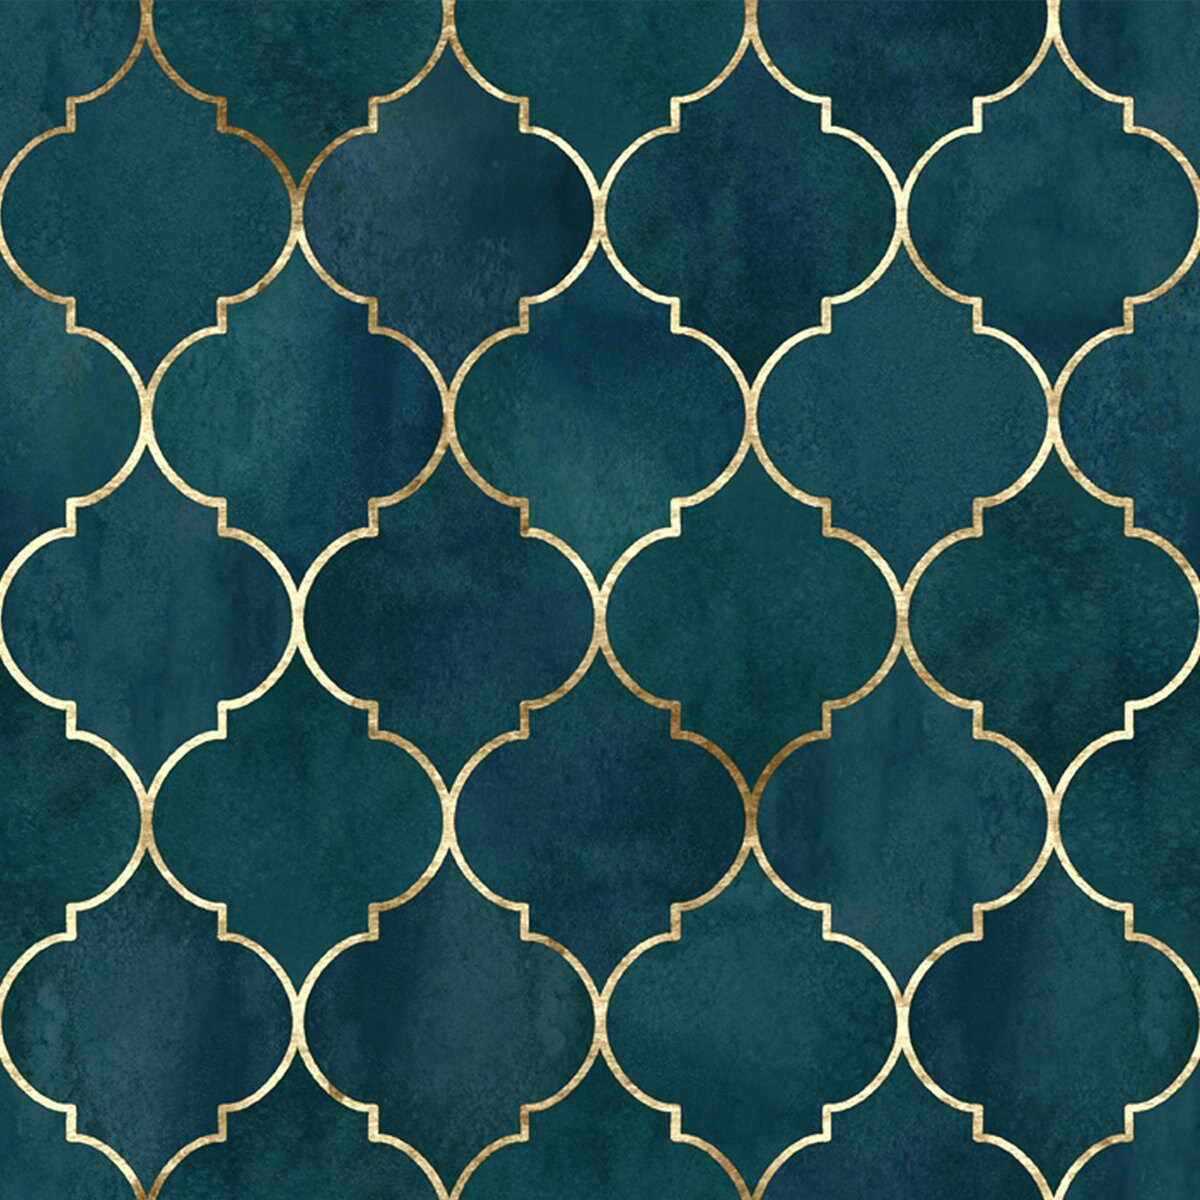 Vintage Decorative Moroccan Seamless Pattern with Gold Line. Watercolor Hand Drawn Dark Green Teal Background Wallpaper Dining Room Mural